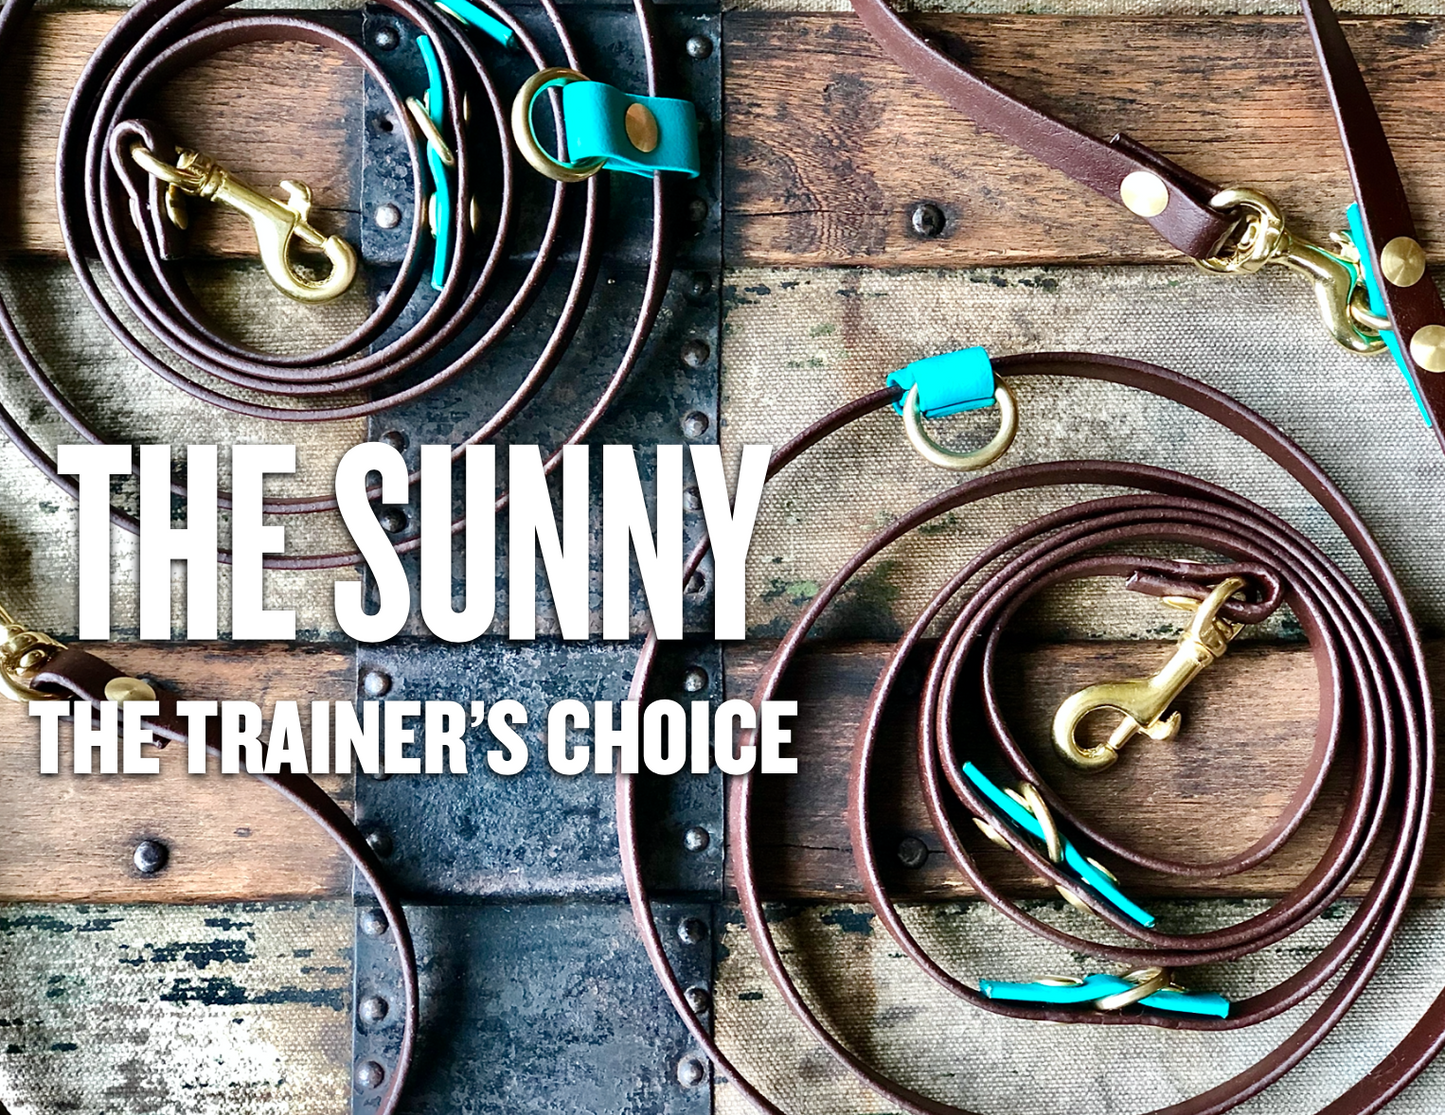 The Trailblazing Tails: The Sunny dog leash is Your Whole Dog's choice.